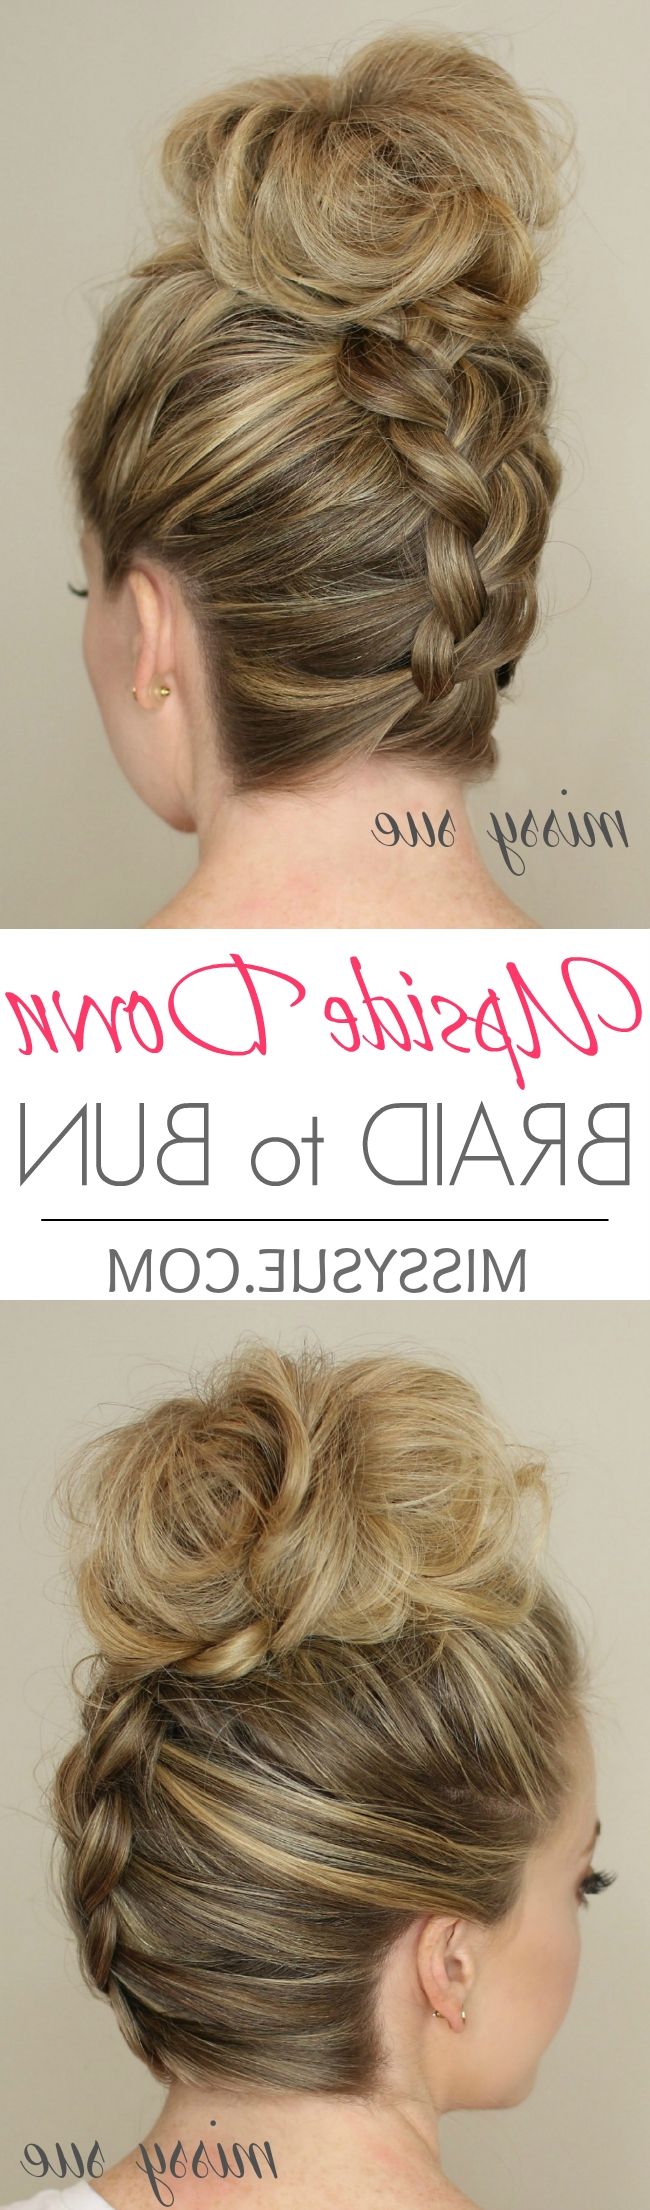 Upside Down Braid To Bun Pertaining To Well Liked Upside Down Fishtail Braid Hairstyles (View 14 of 15)